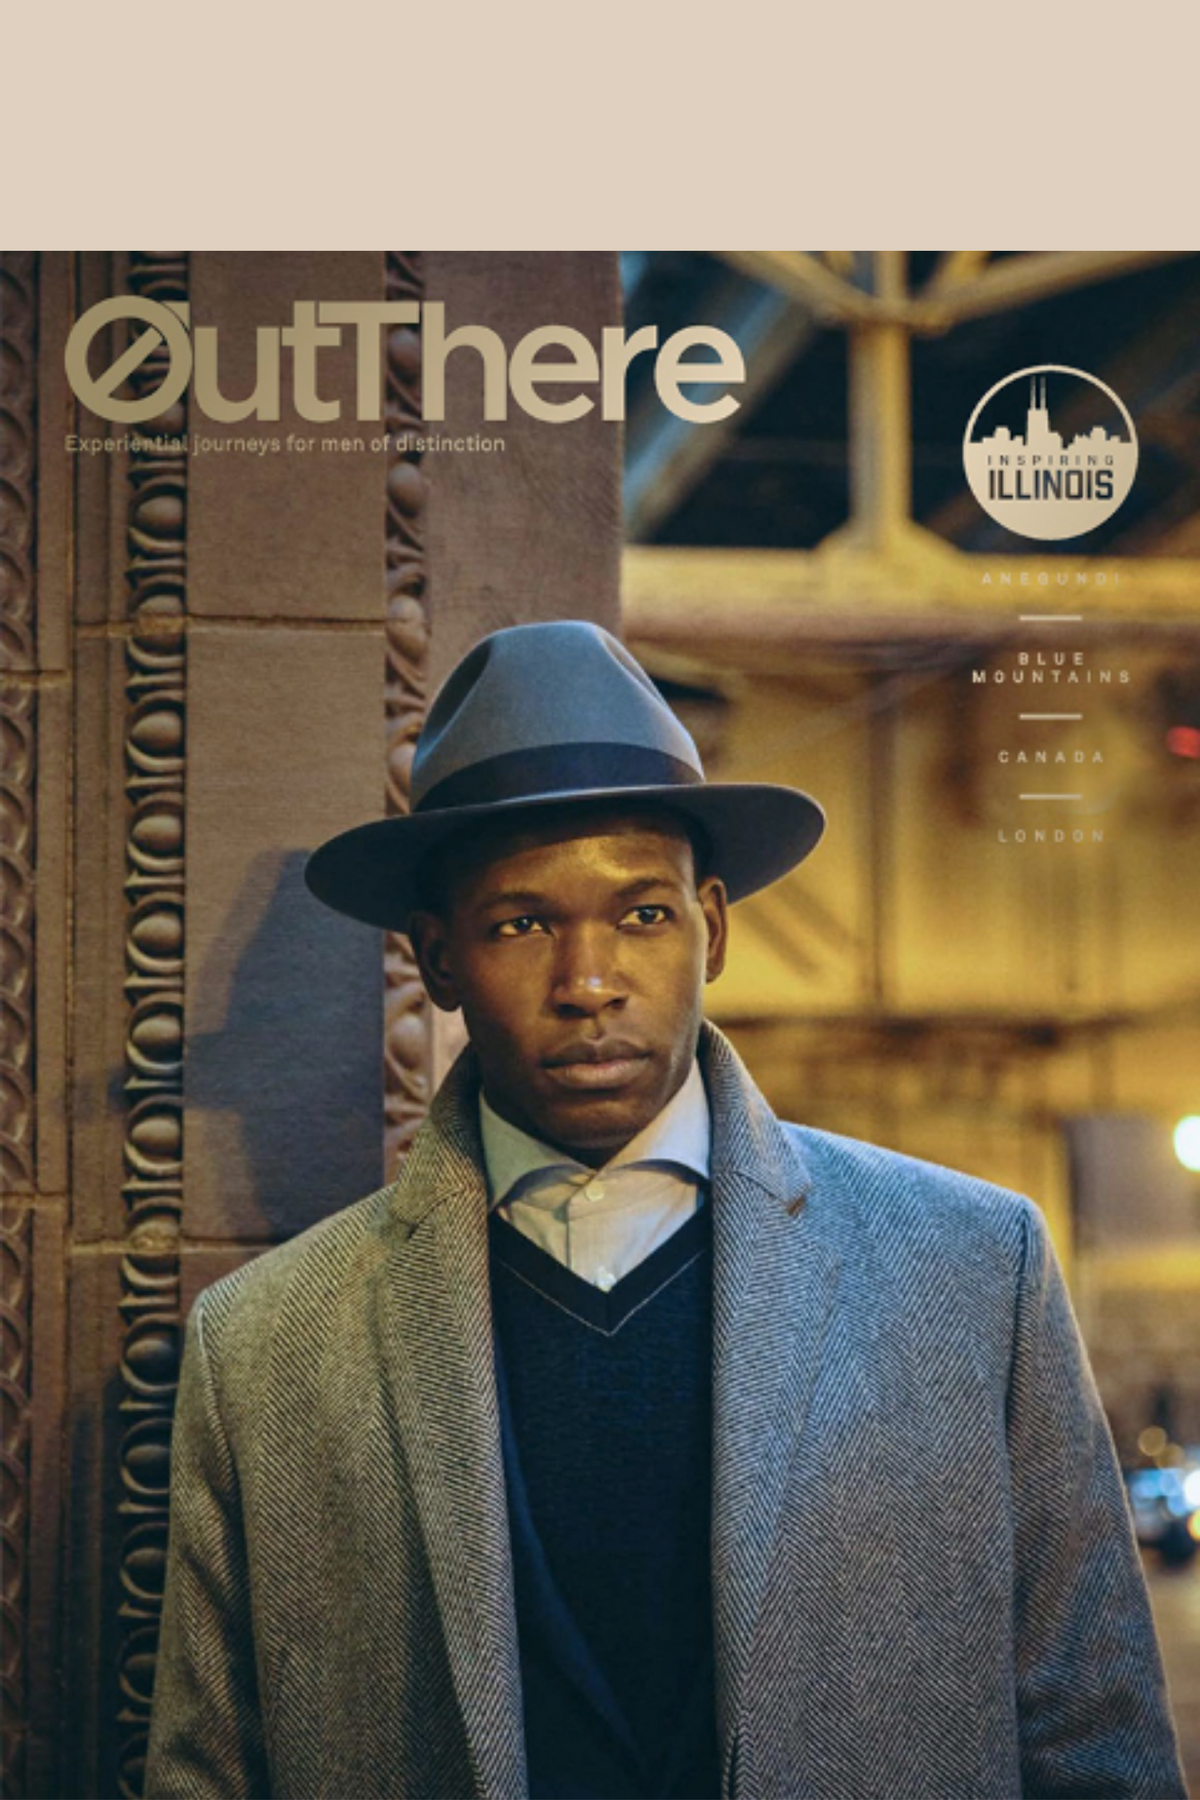 Out There Magazine